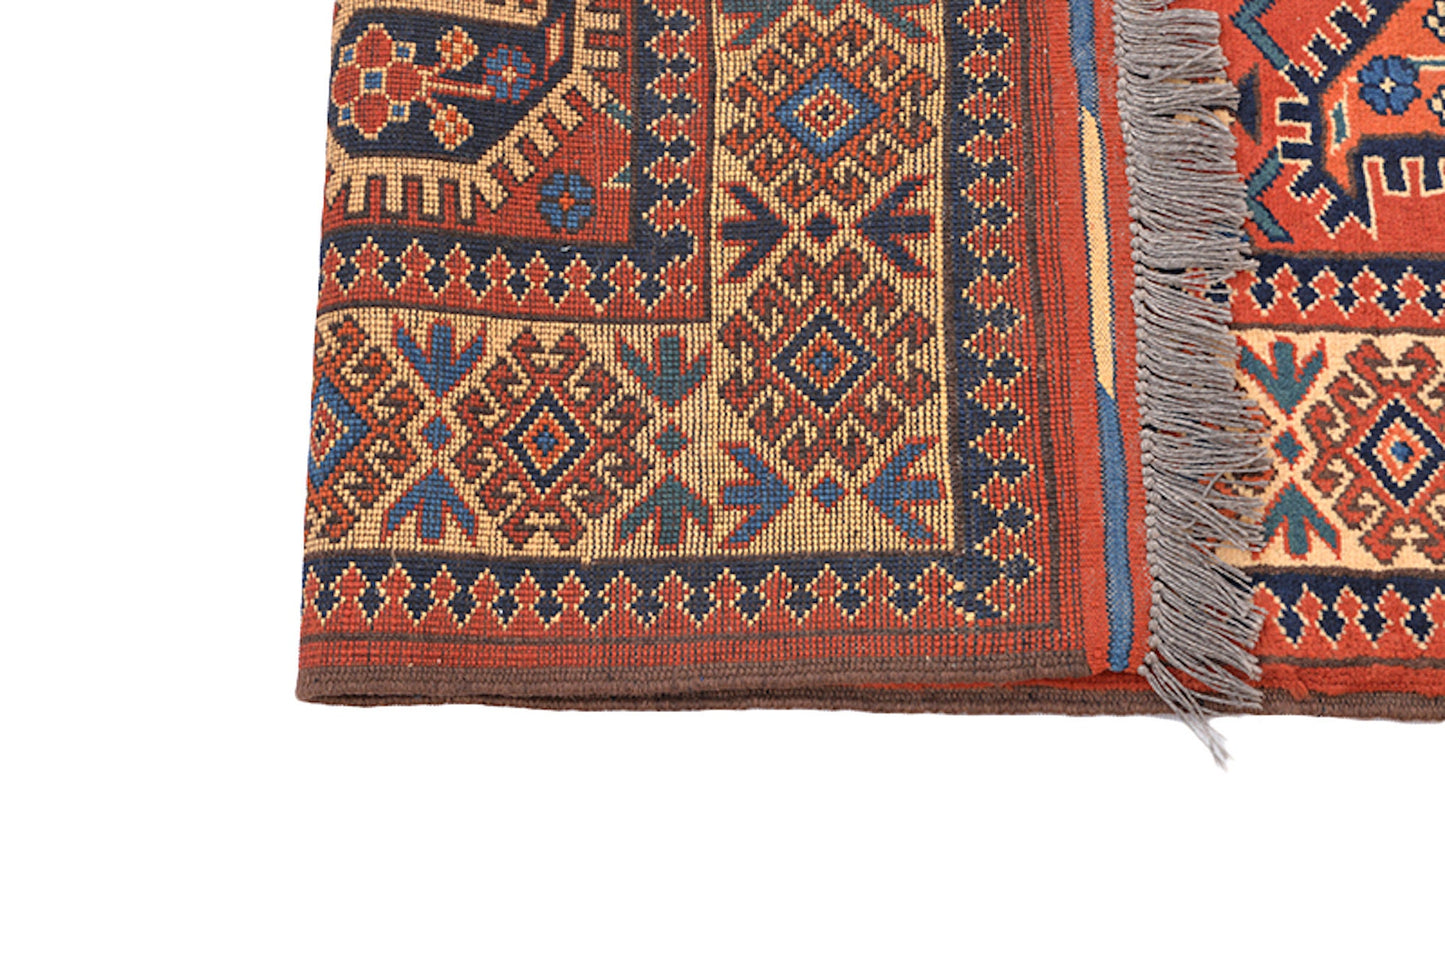 4 x 6 Orange with Blue Paisley Design Hand Knotted Rug